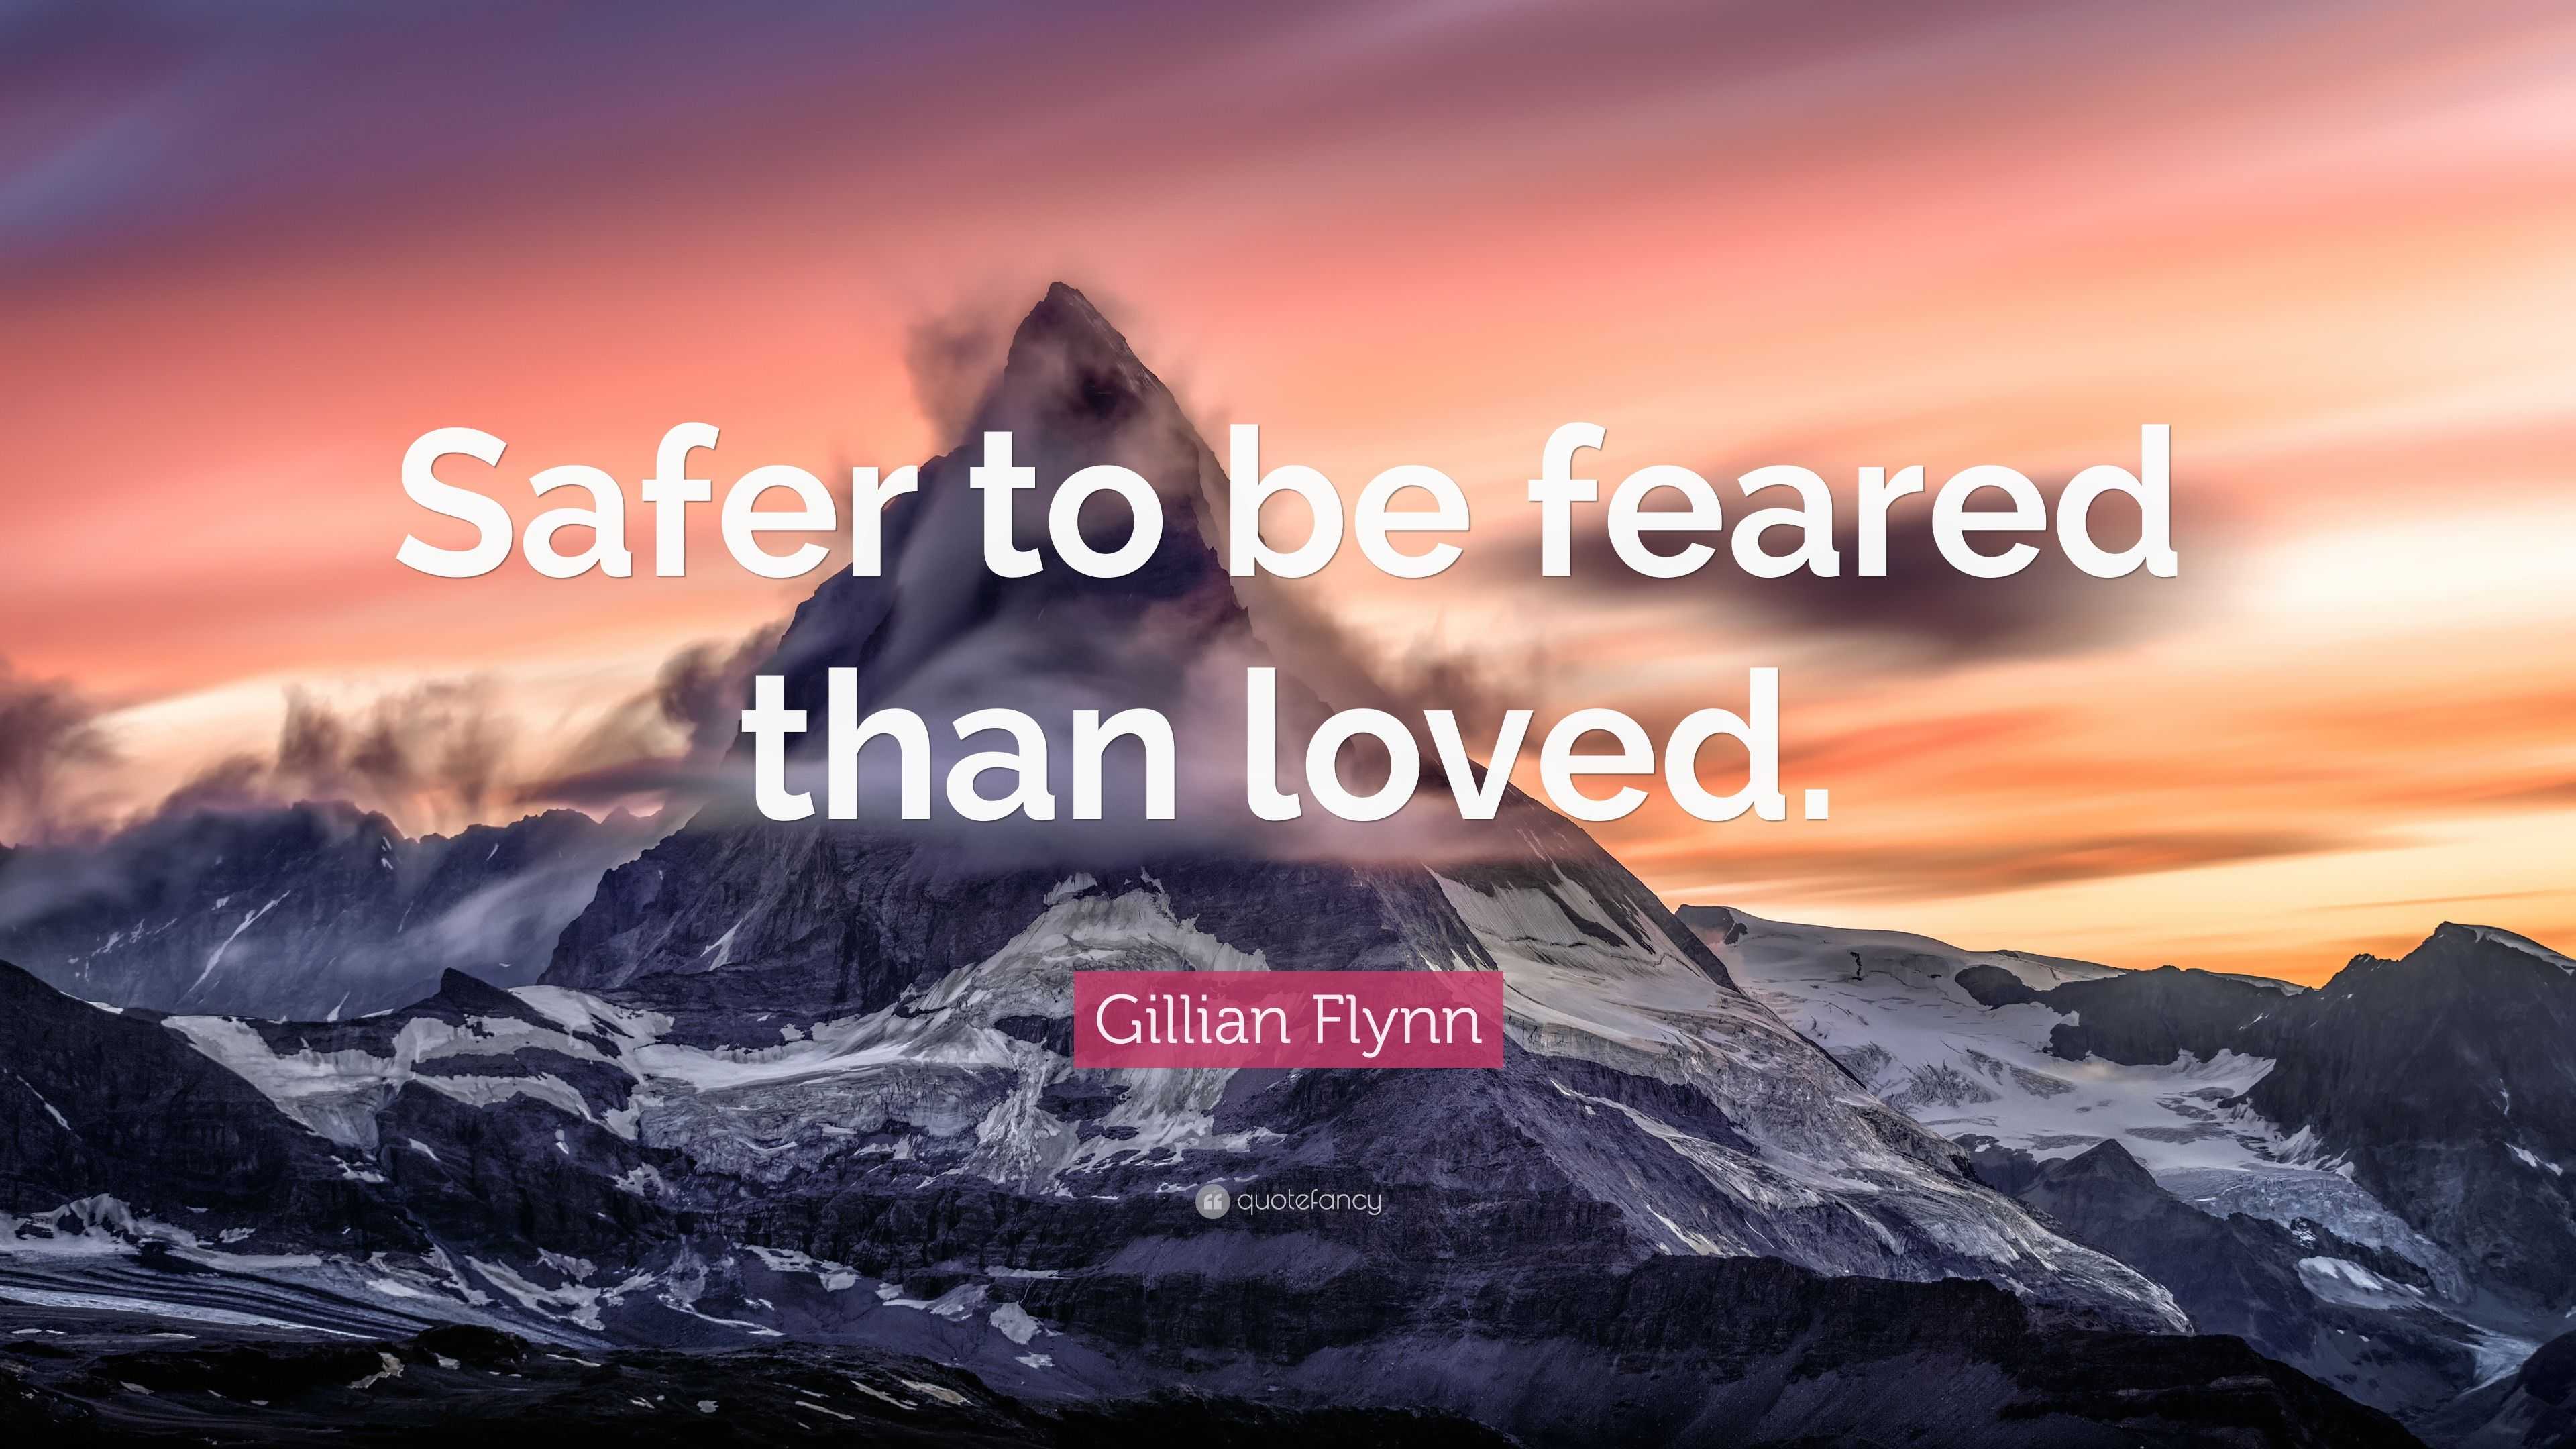 safer to be feared than loved